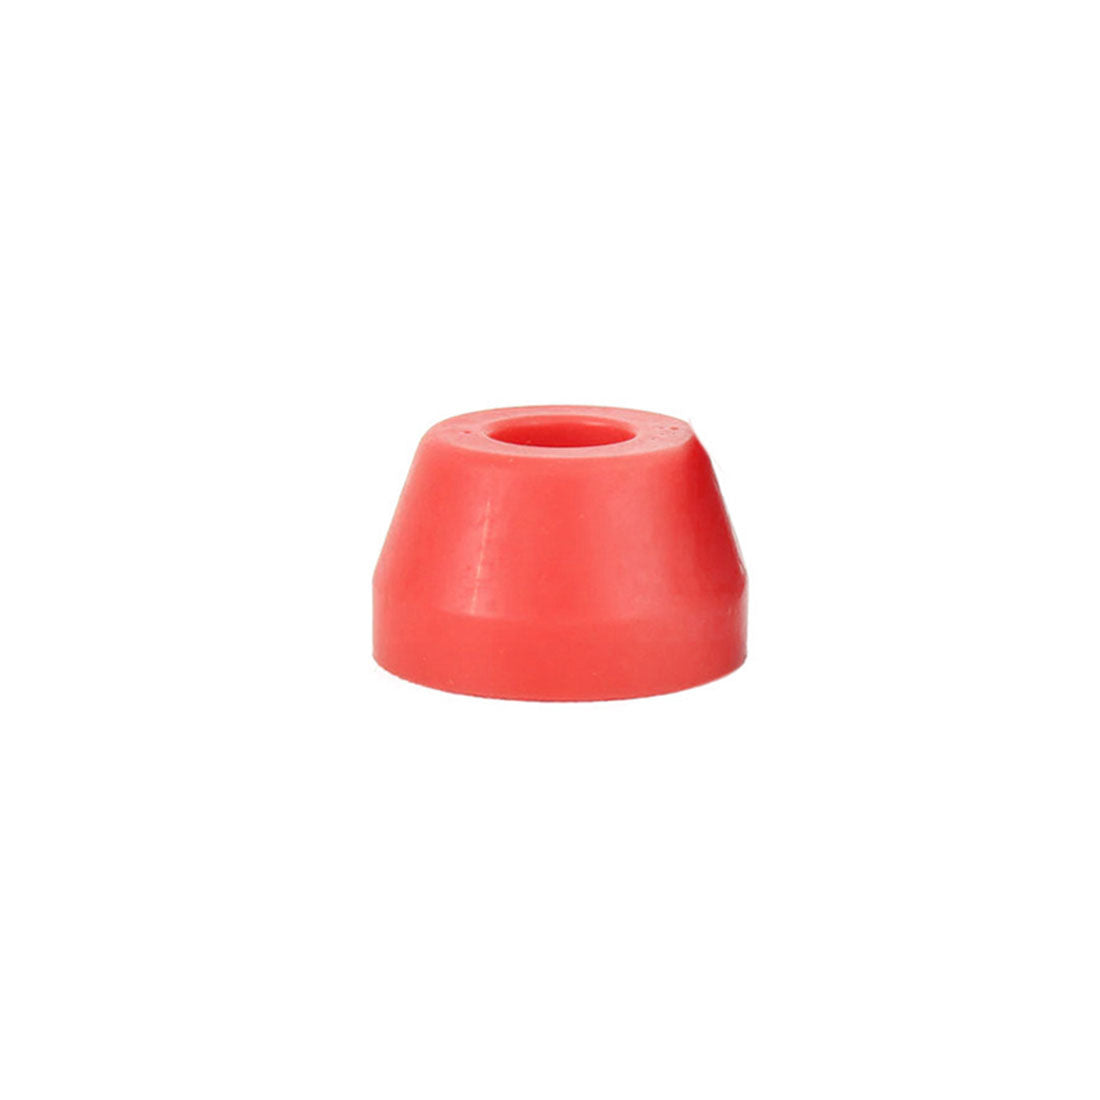 ABEC 11 Reflex Conical Bushing - Single .550&quot; 92a - Red Skateboard Hardware and Parts